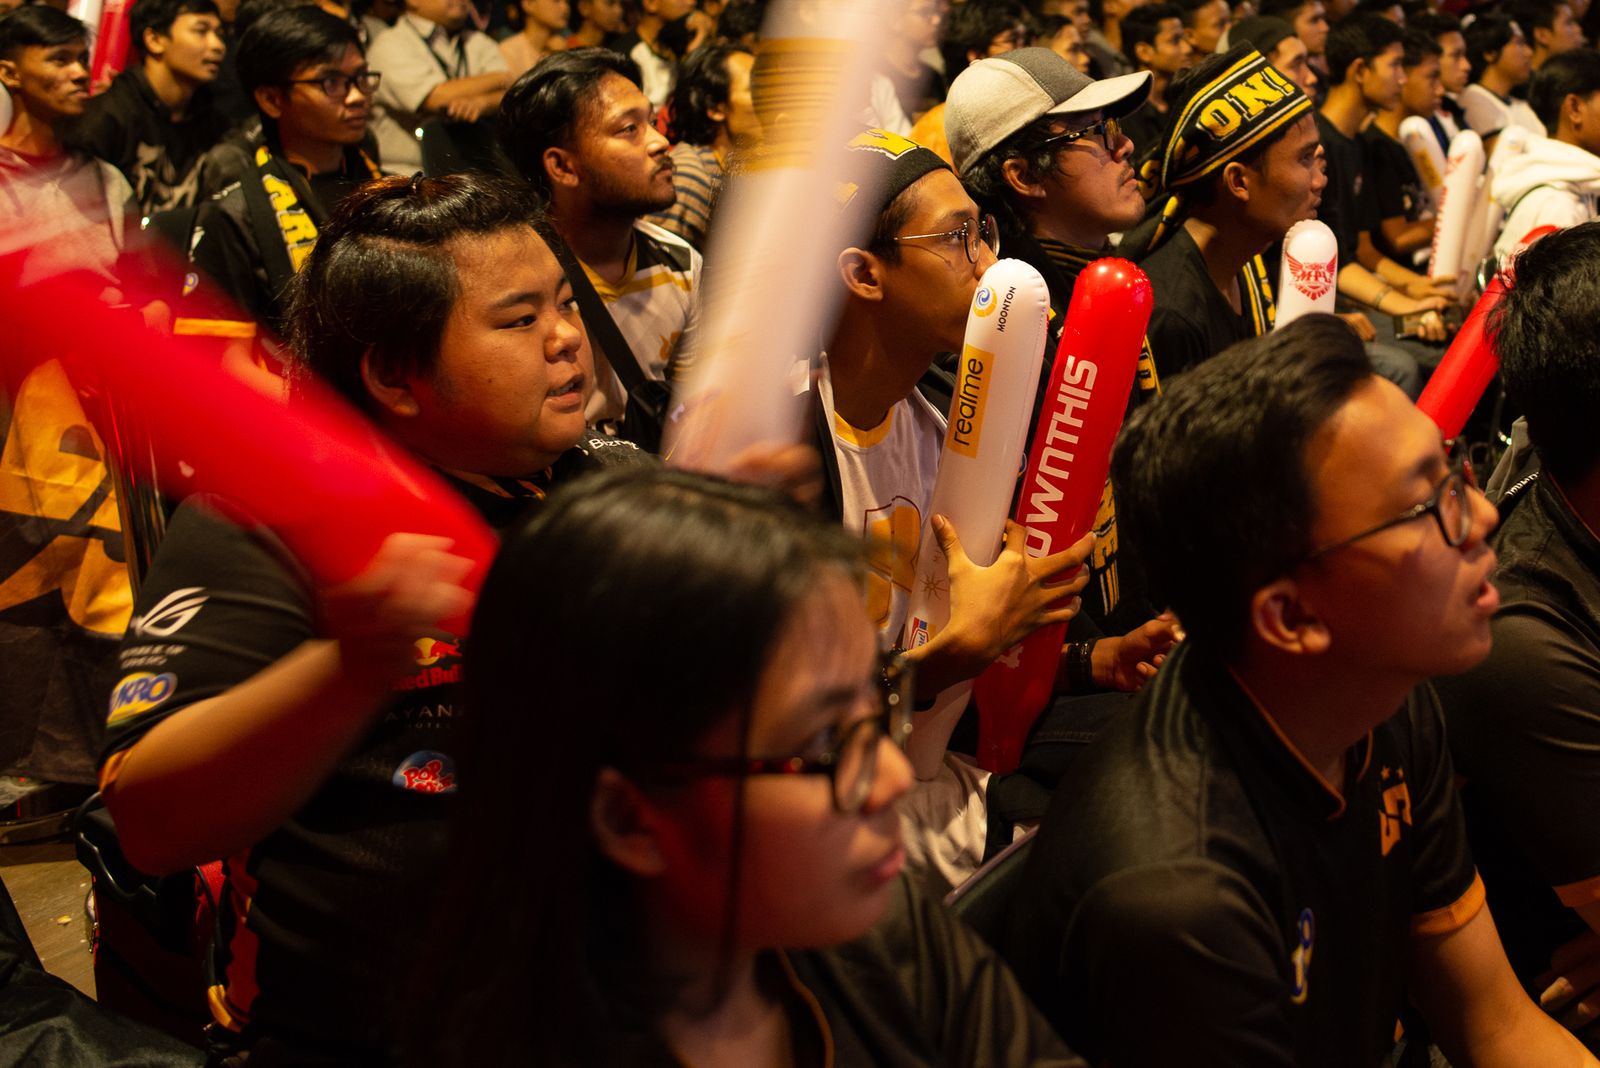 © Hafitz Maulana - The enthusiasm of the e-sport club supporters during e-sports competitions.